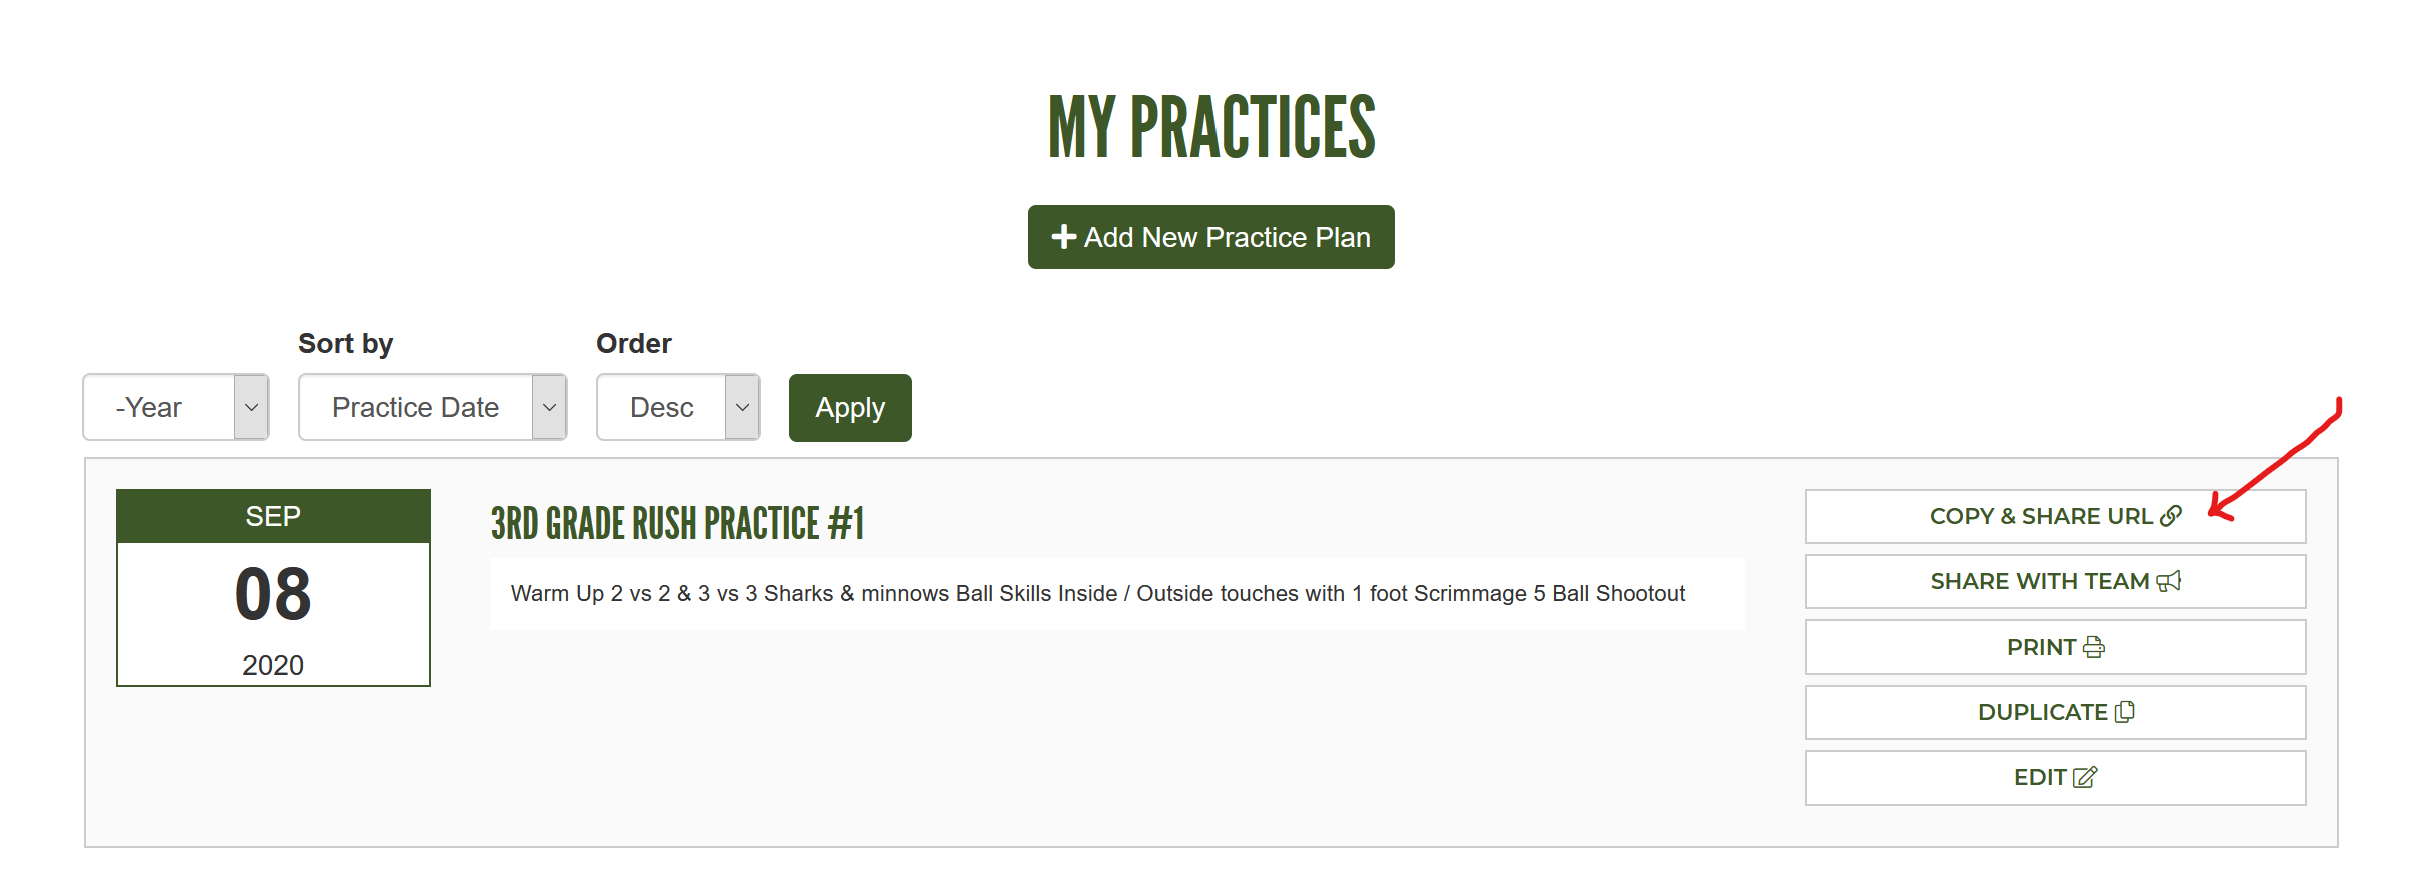 Copy and Share URL Button on my practices page